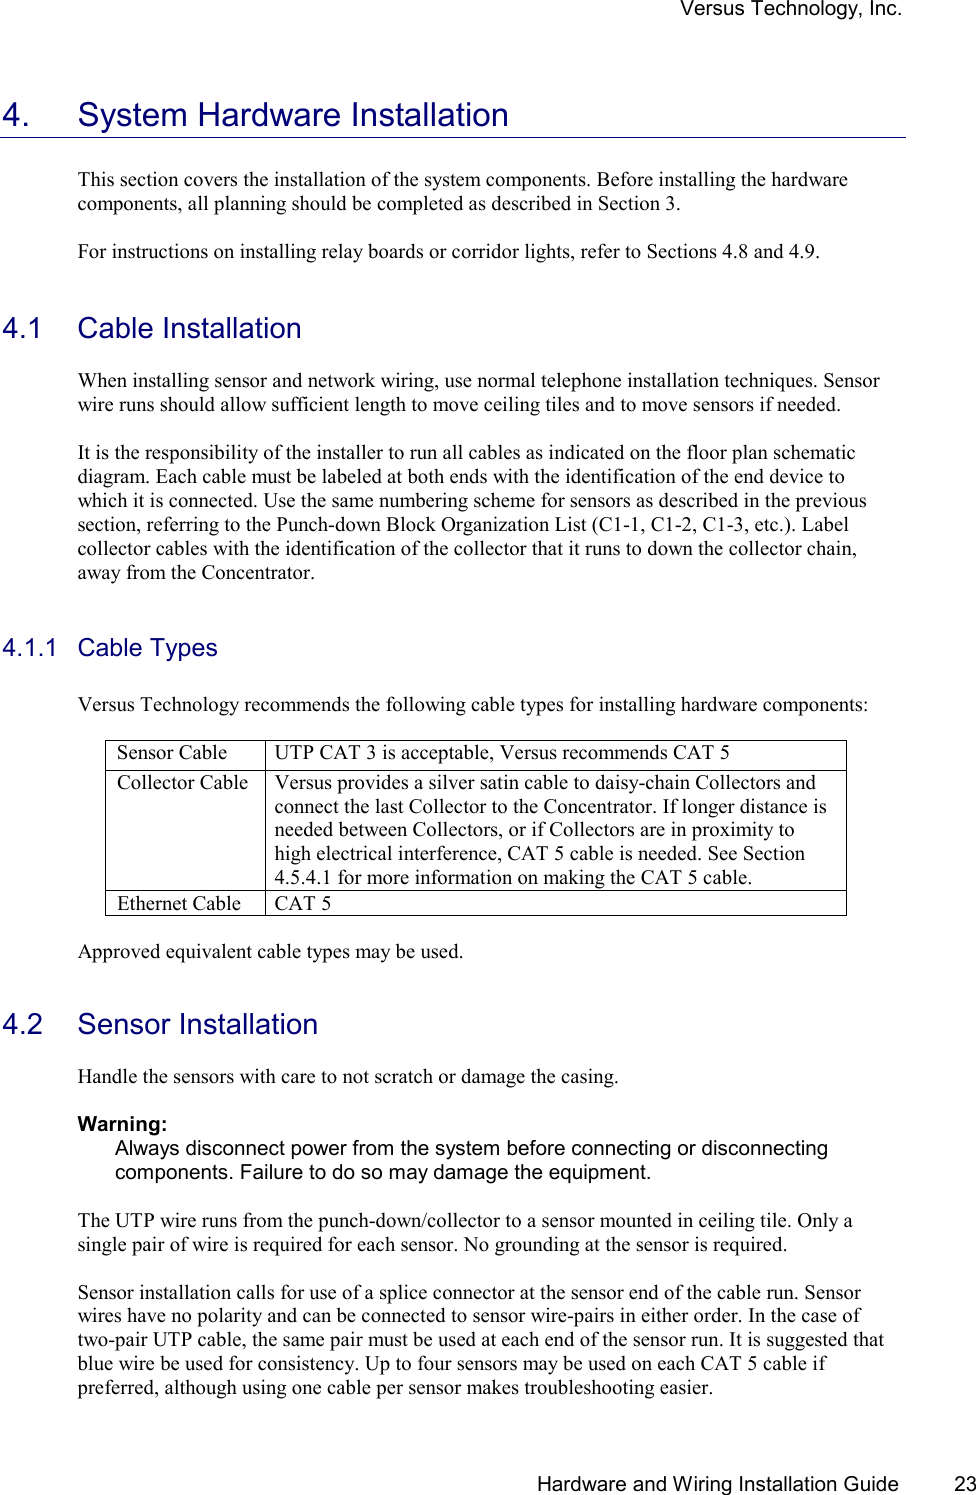 Versus Technology, Inc.   Hardware and Wiring Installation Guide  23 4.  System Hardware Installation  This section covers the installation of the system components. Before installing the hardware components, all planning should be completed as described in Section 3.  For instructions on installing relay boards or corridor lights, refer to Sections 4.8 and 4.9.   4.1  Cable Installation   When installing sensor and network wiring, use normal telephone installation techniques. Sensor wire runs should allow sufficient length to move ceiling tiles and to move sensors if needed.    It is the responsibility of the installer to run all cables as indicated on the floor plan schematic diagram. Each cable must be labeled at both ends with the identification of the end device to which it is connected. Use the same numbering scheme for sensors as described in the previous section, referring to the Punch-down Block Organization List (C1-1, C1-2, C1-3, etc.). Label collector cables with the identification of the collector that it runs to down the collector chain, away from the Concentrator.  4.1.1 Cable Types  Versus Technology recommends the following cable types for installing hardware components:  Sensor Cable   UTP CAT 3 is acceptable, Versus recommends CAT 5 Collector Cable  Versus provides a silver satin cable to daisy-chain Collectors and connect the last Collector to the Concentrator. If longer distance is needed between Collectors, or if Collectors are in proximity to high electrical interference, CAT 5 cable is needed. See Section 4.5.4.1 for more information on making the CAT 5 cable. Ethernet Cable  CAT 5  Approved equivalent cable types may be used.    4.2 Sensor Installation  Handle the sensors with care to not scratch or damage the casing.  Warning: Always disconnect power from the system before connecting or disconnecting components. Failure to do so may damage the equipment.  The UTP wire runs from the punch-down/collector to a sensor mounted in ceiling tile. Only a single pair of wire is required for each sensor. No grounding at the sensor is required.   Sensor installation calls for use of a splice connector at the sensor end of the cable run. Sensor wires have no polarity and can be connected to sensor wire-pairs in either order. In the case of two-pair UTP cable, the same pair must be used at each end of the sensor run. It is suggested that  blue wire be used for consistency. Up to four sensors may be used on each CAT 5 cable if preferred, although using one cable per sensor makes troubleshooting easier. 